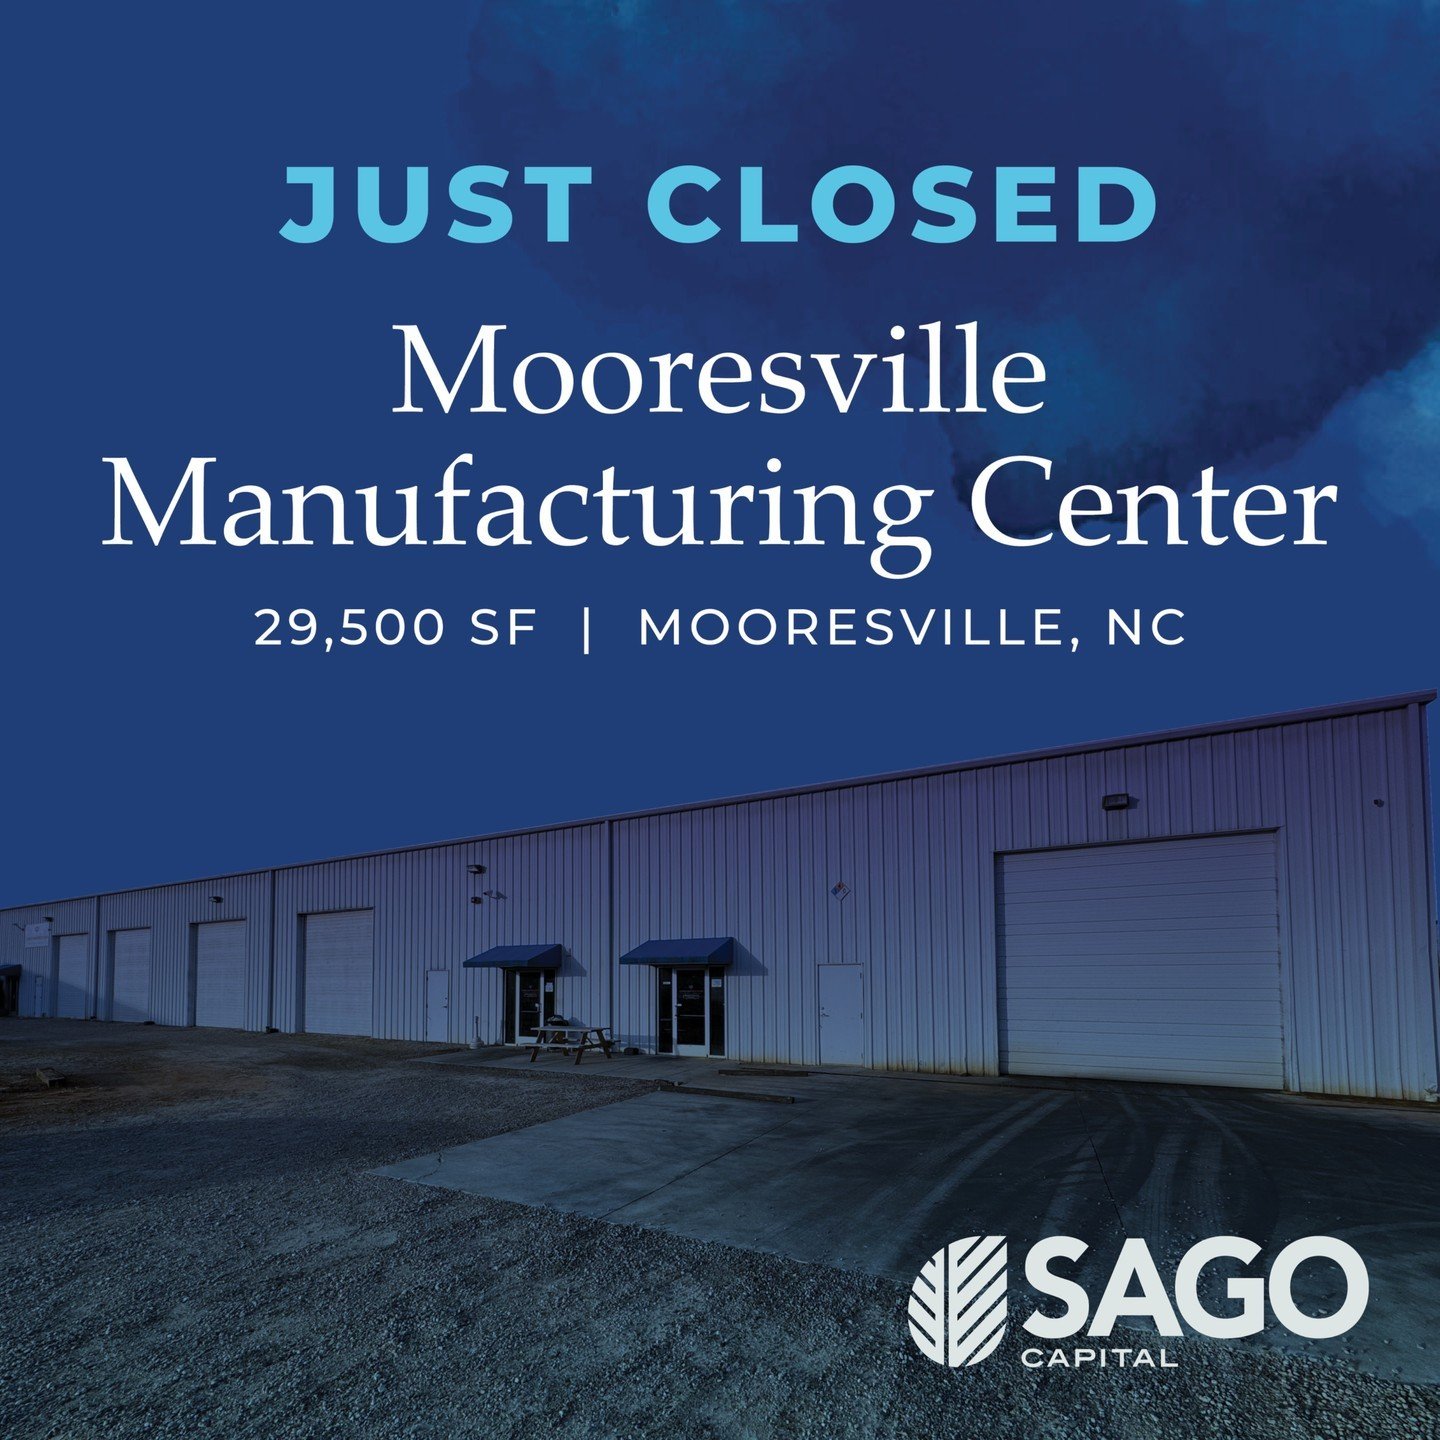 This week Sago closed on the acquisition of a 29,500 sf single-tenant industrial warehouse complex in Mooresville, North Carolina. The assets are 100% leased to a private equity sponsored speciality parts manufacturer.